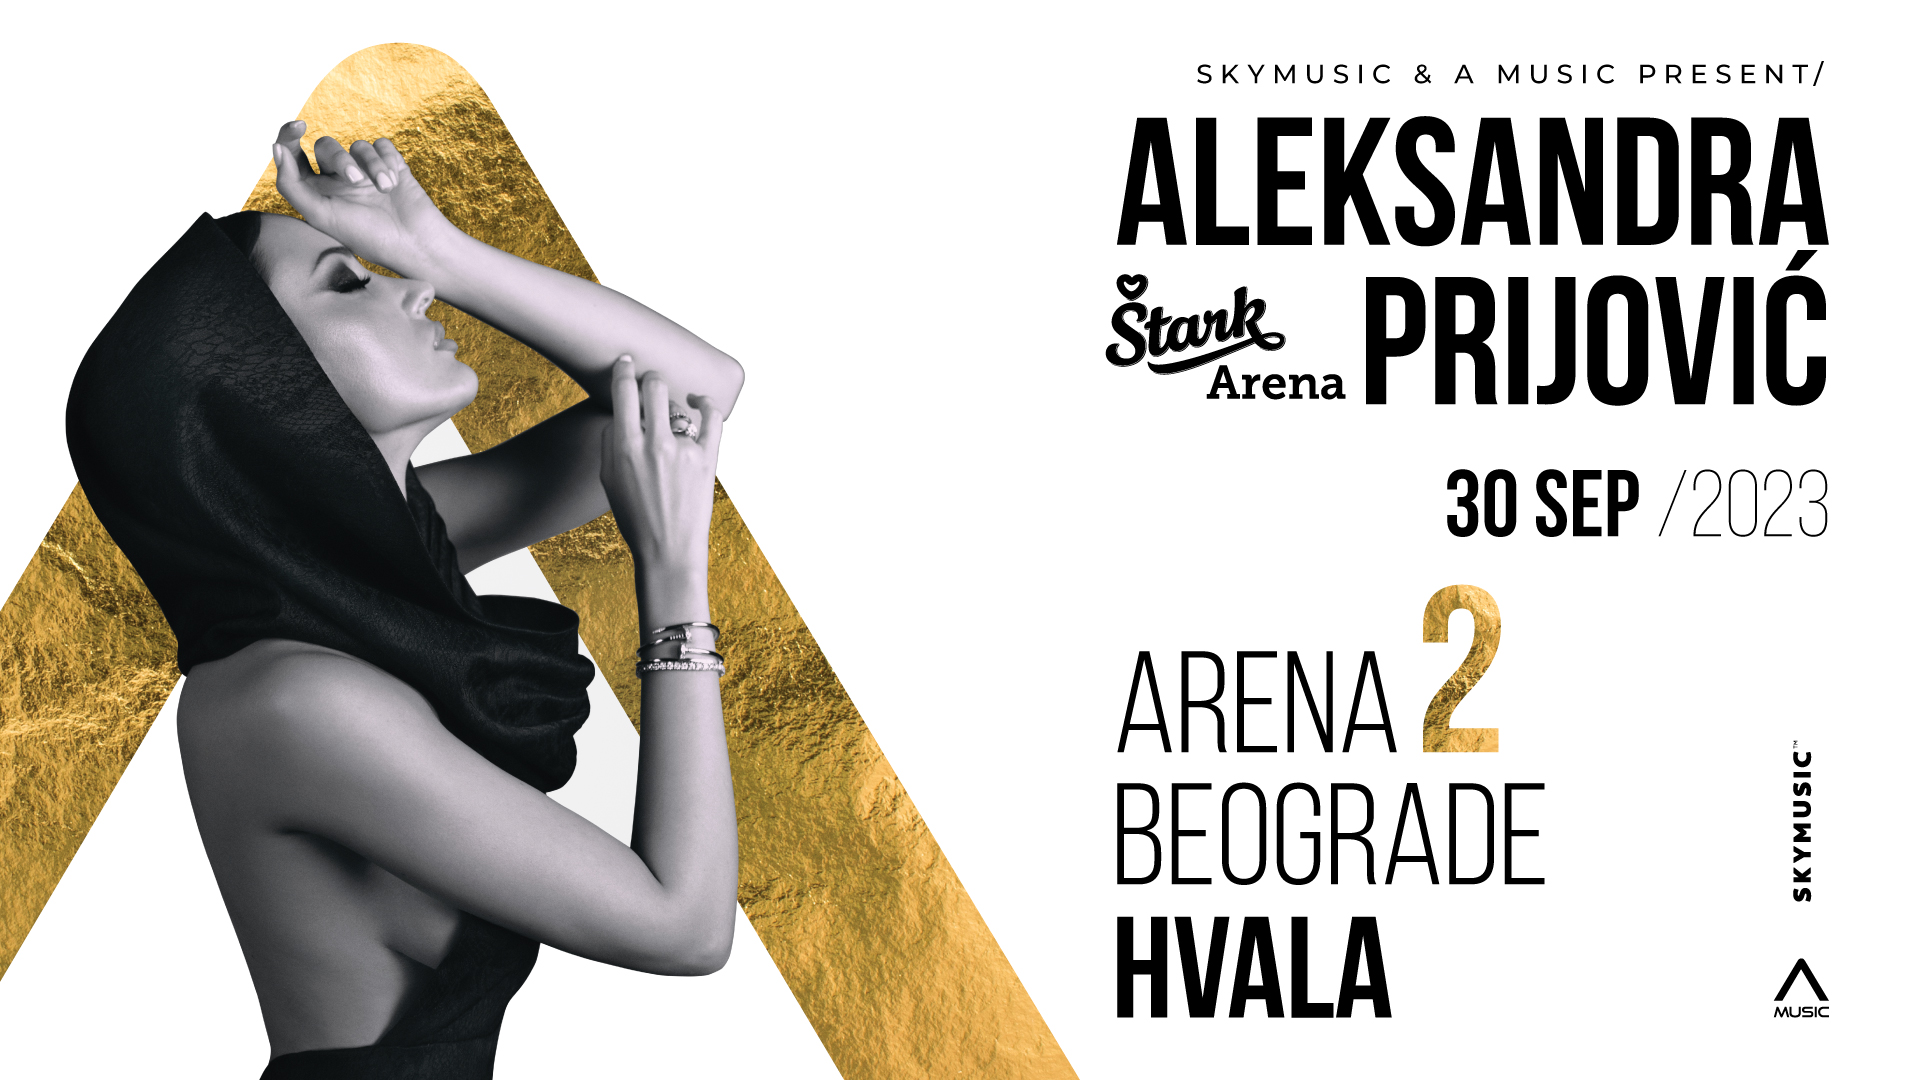 Aleksandra Prijović sold out 50 percent of the capacity for "Arena 2" in less than 24 hours